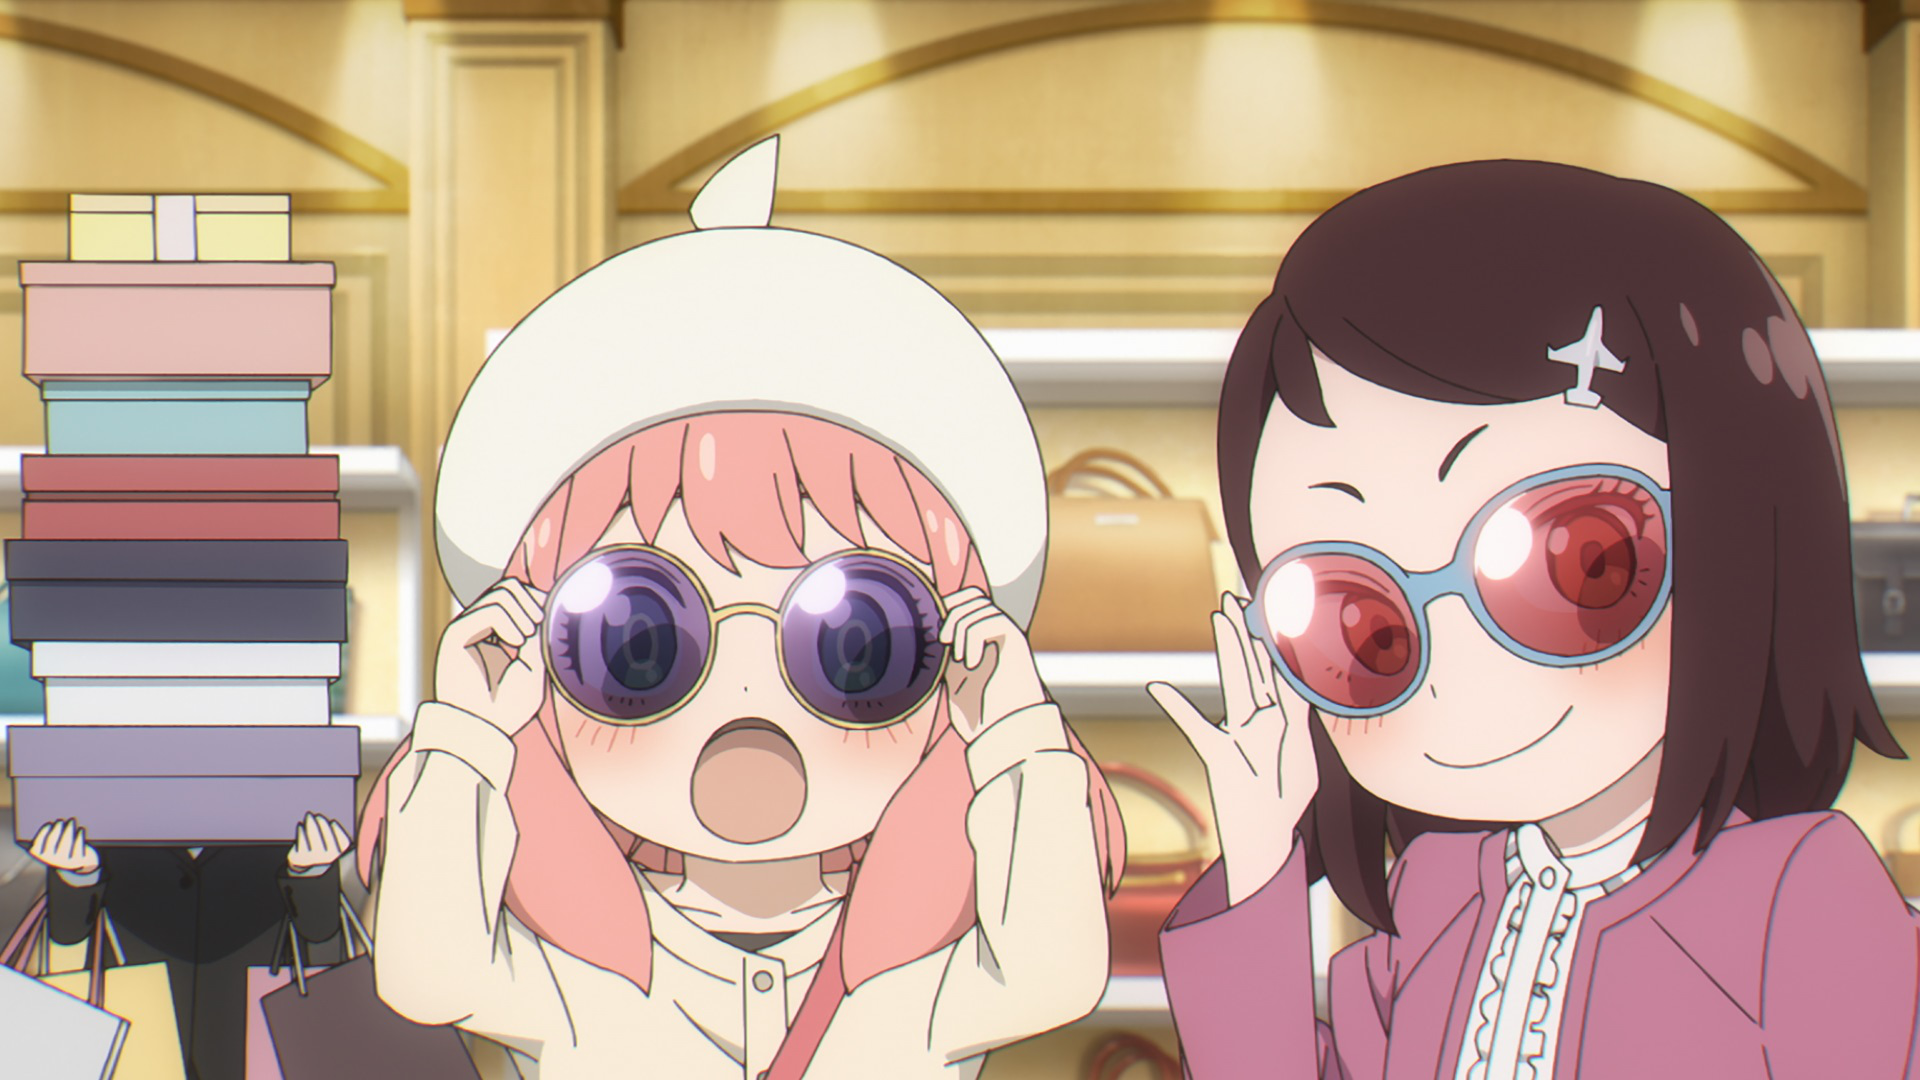 Spy x Family Episode 22 Preview Images Released - Anime Corner